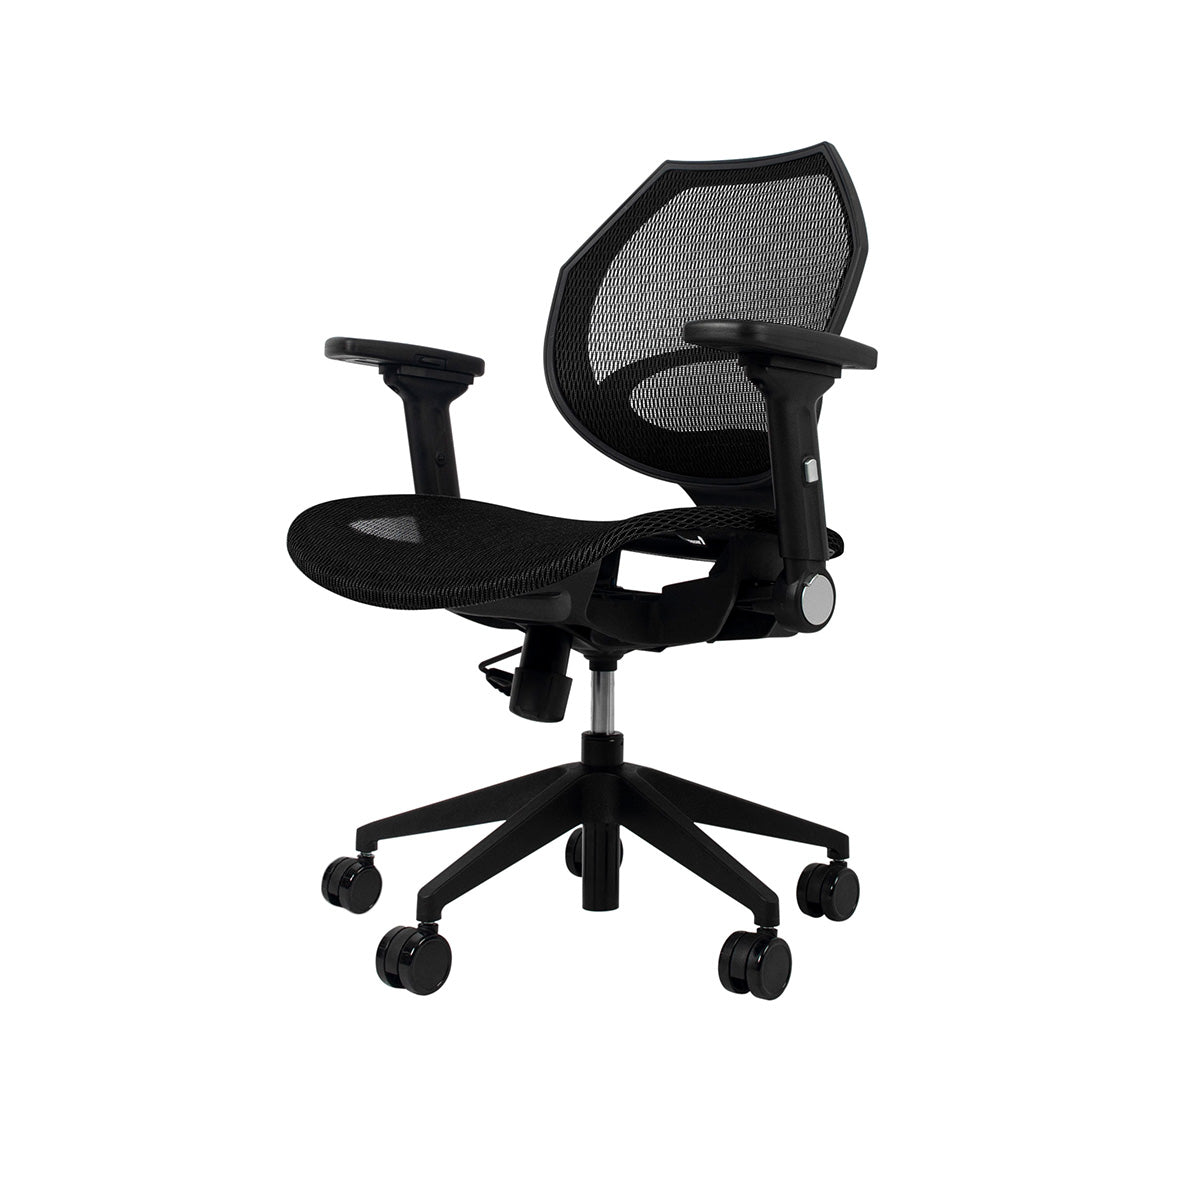 Wavebone Voyager I Ergonomic Studio Chair with Low Back support